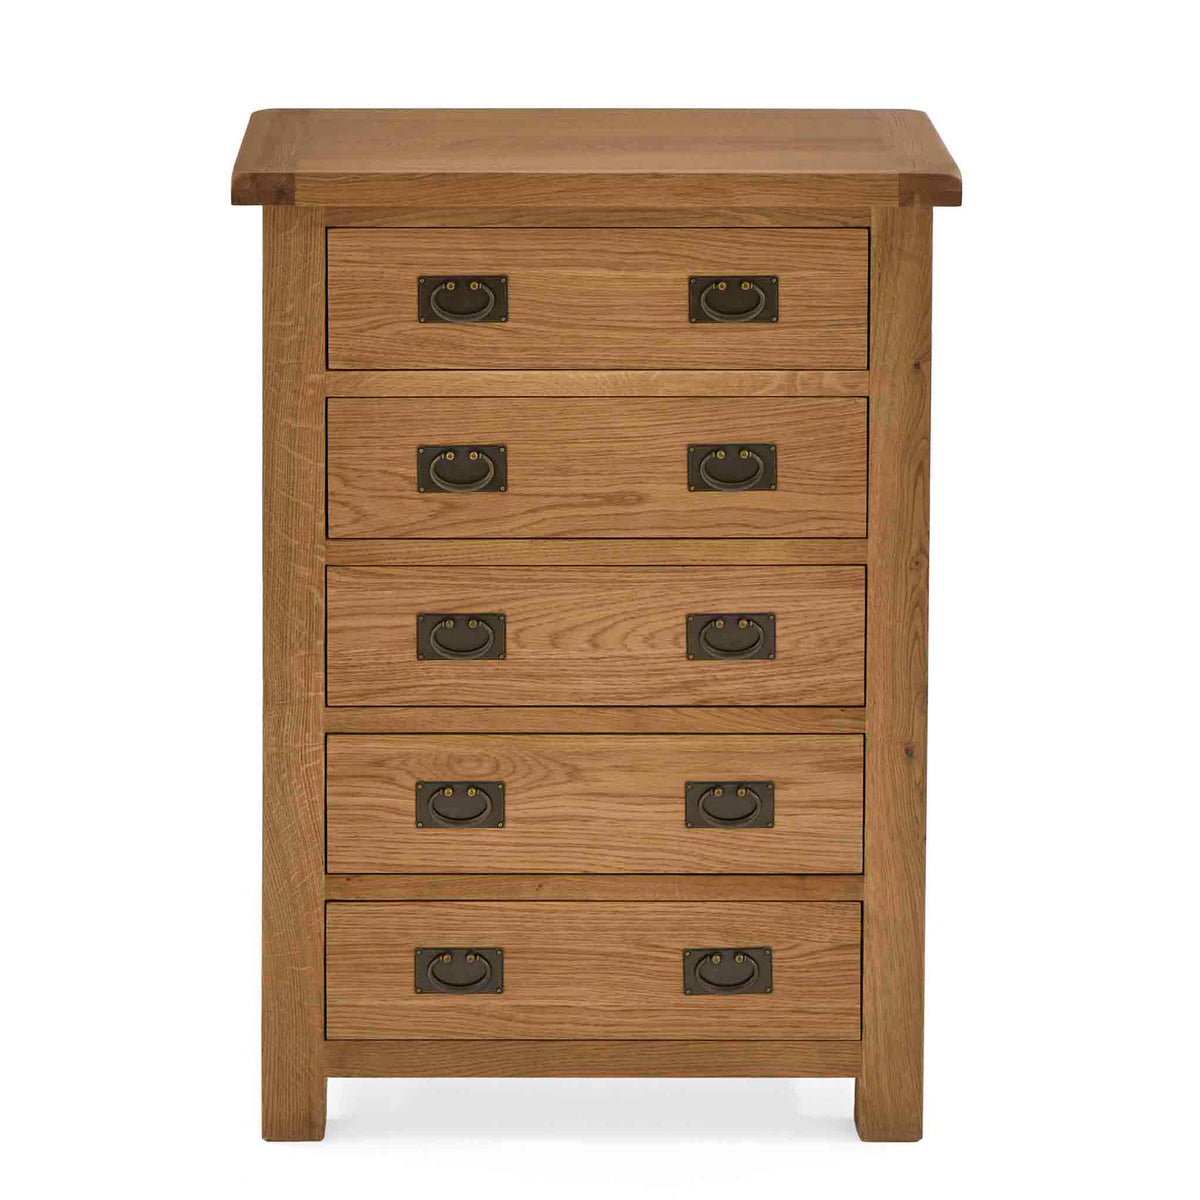 Zelah Oak 5 Drawer Chest of Drawers - Front view showing top